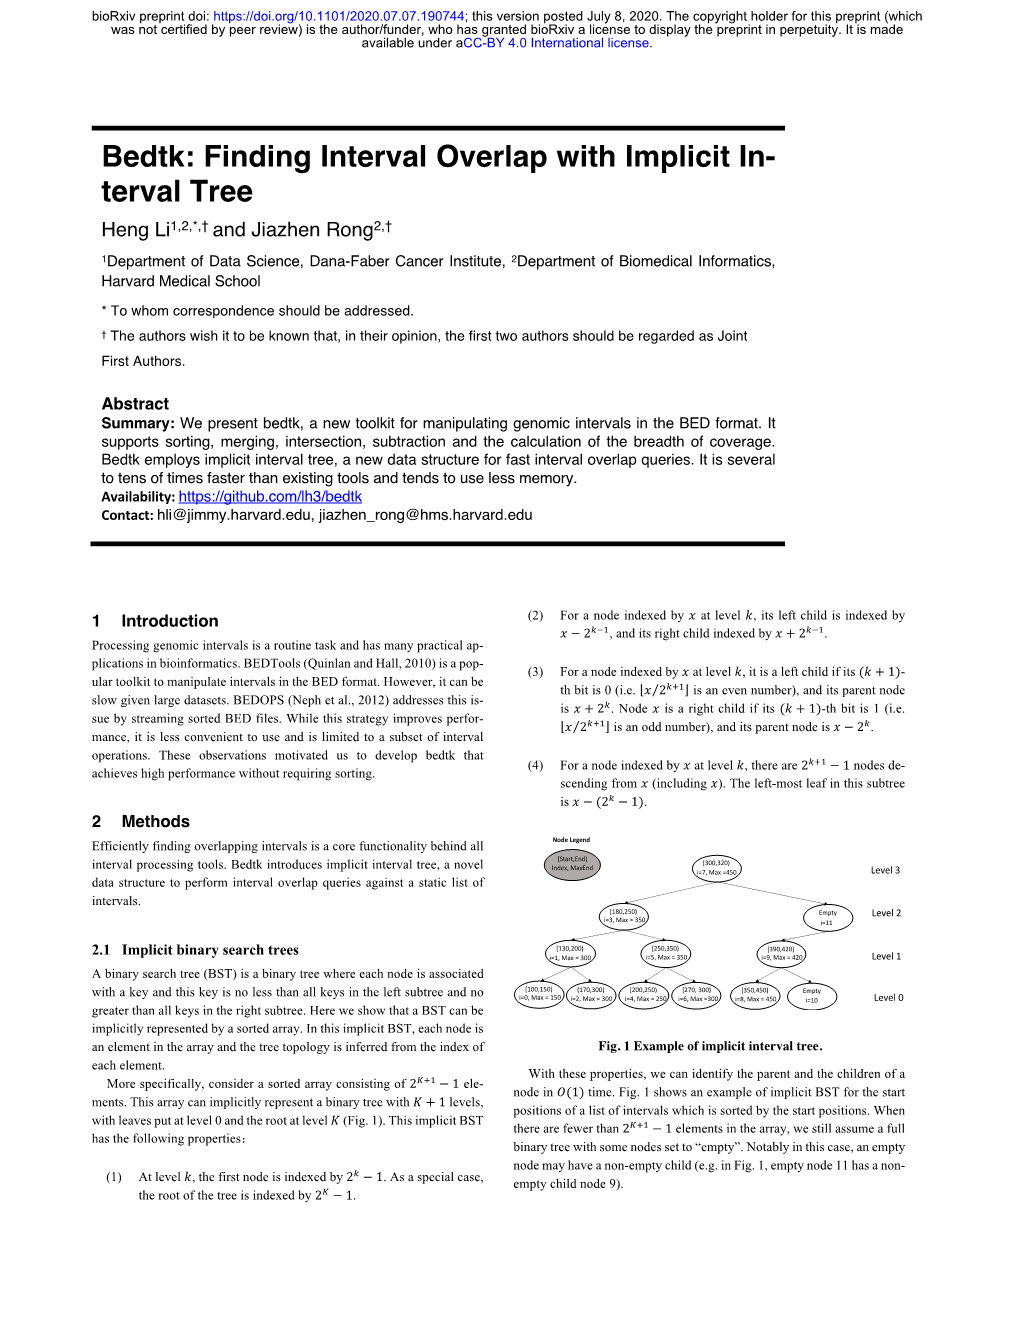 Bedtk: Finding Interval Overlap with Implicit Interval Tree